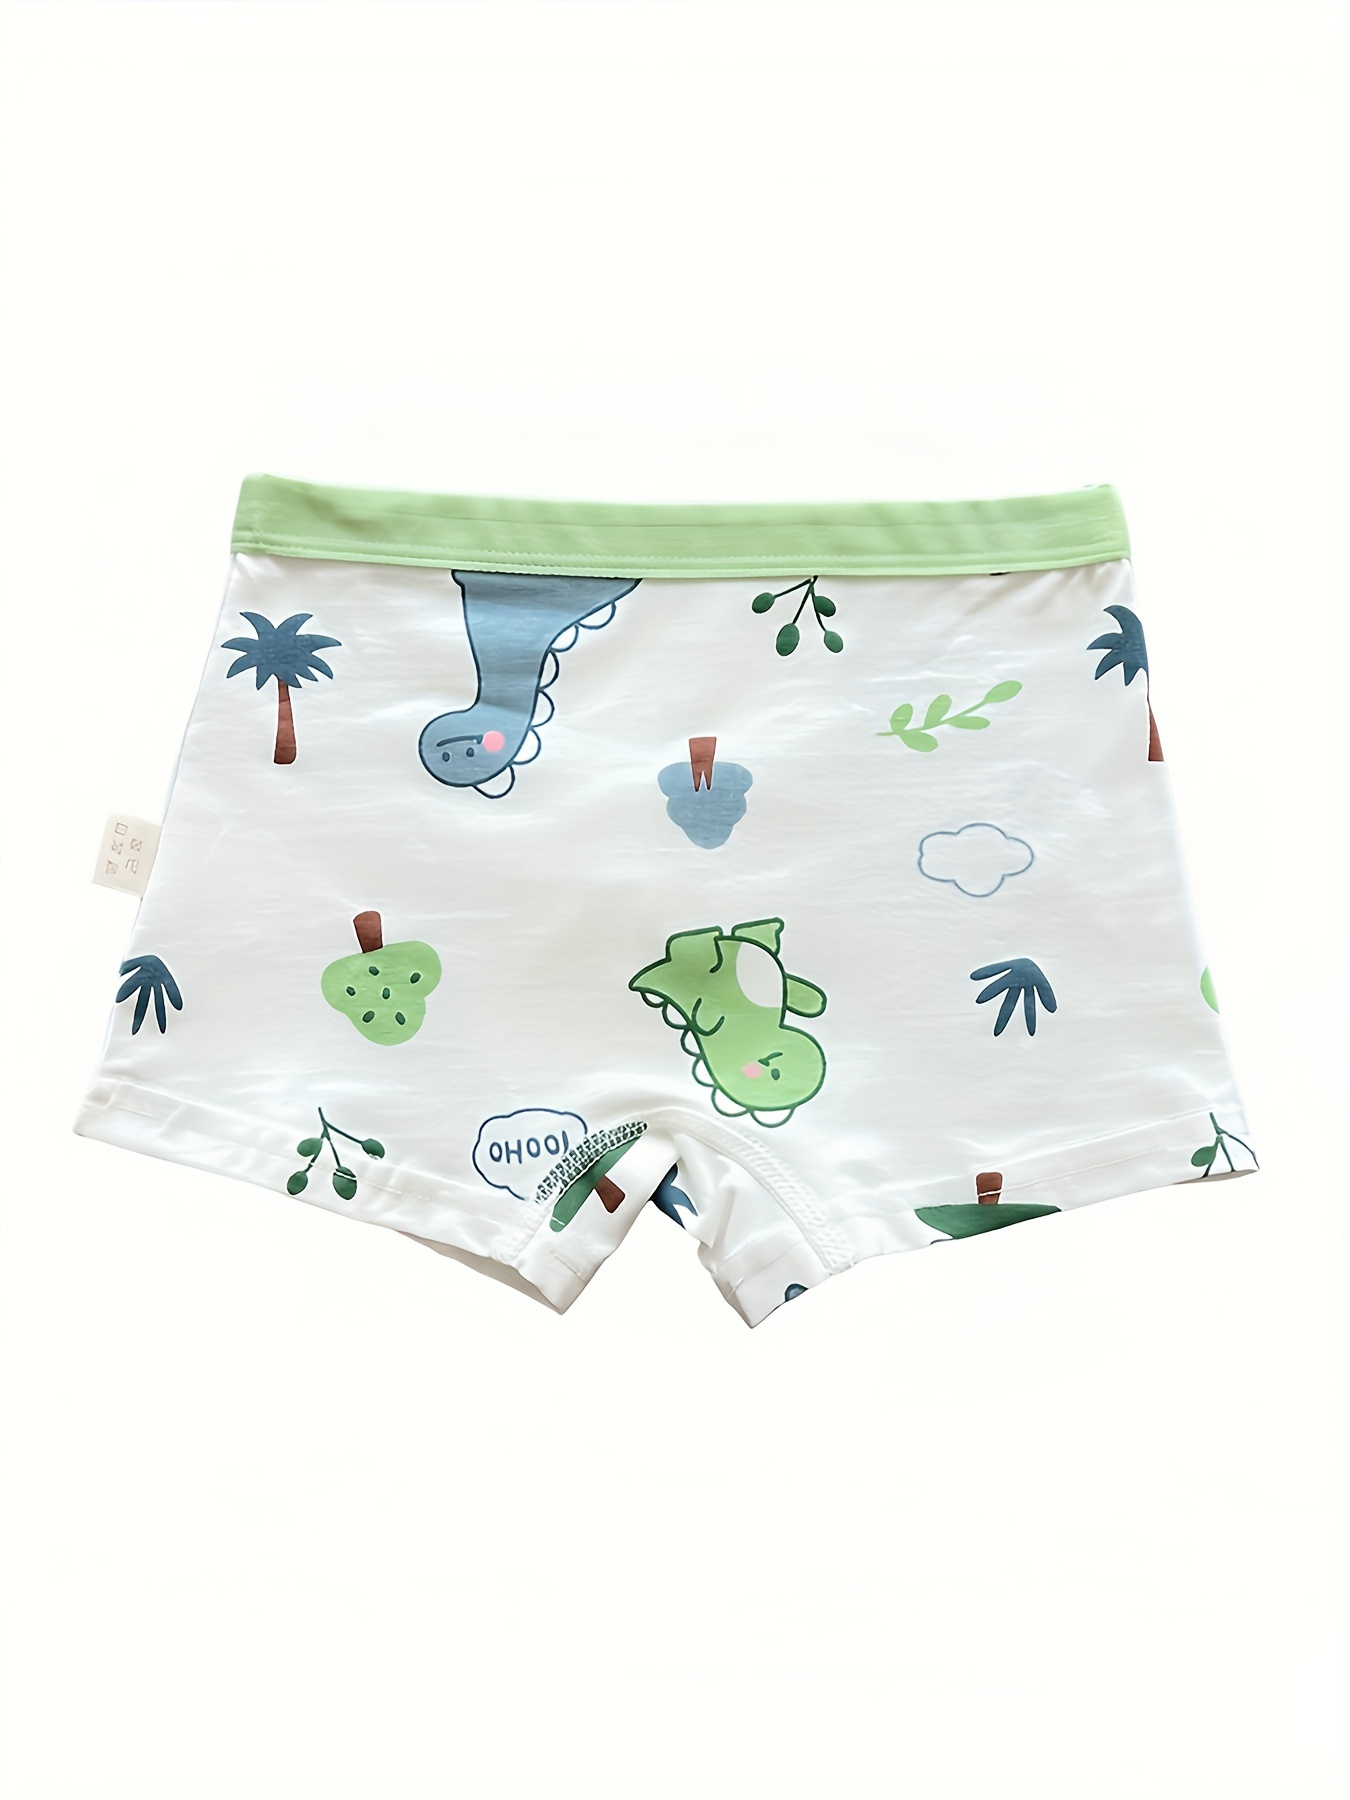 Baby Cute Boxers Children Breathable Antibacterial Girls Cotton